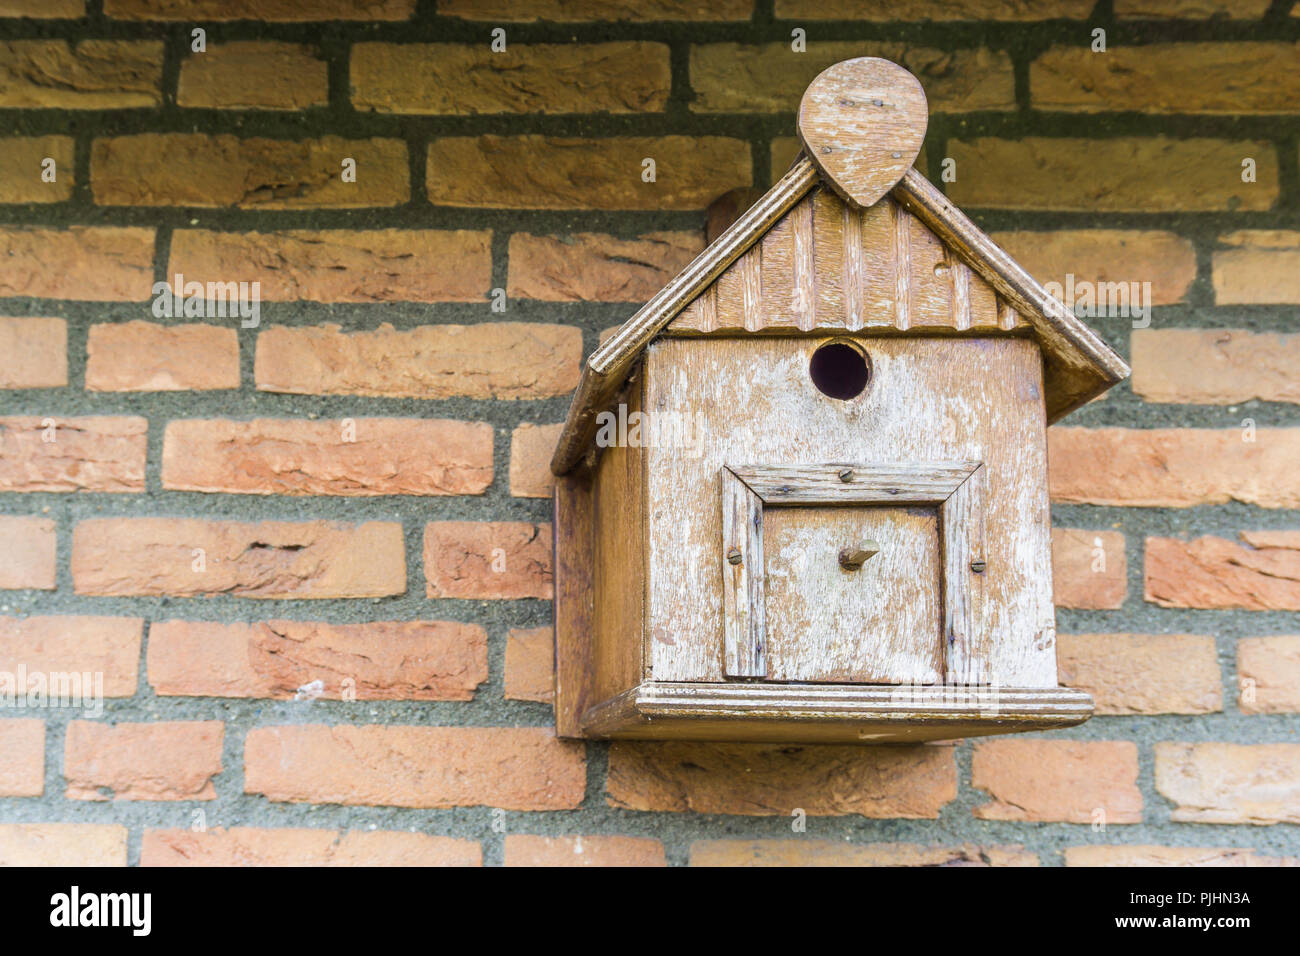 Hand crafted wooden bird house shelter for birds hanging on a brick wall Stock Photo